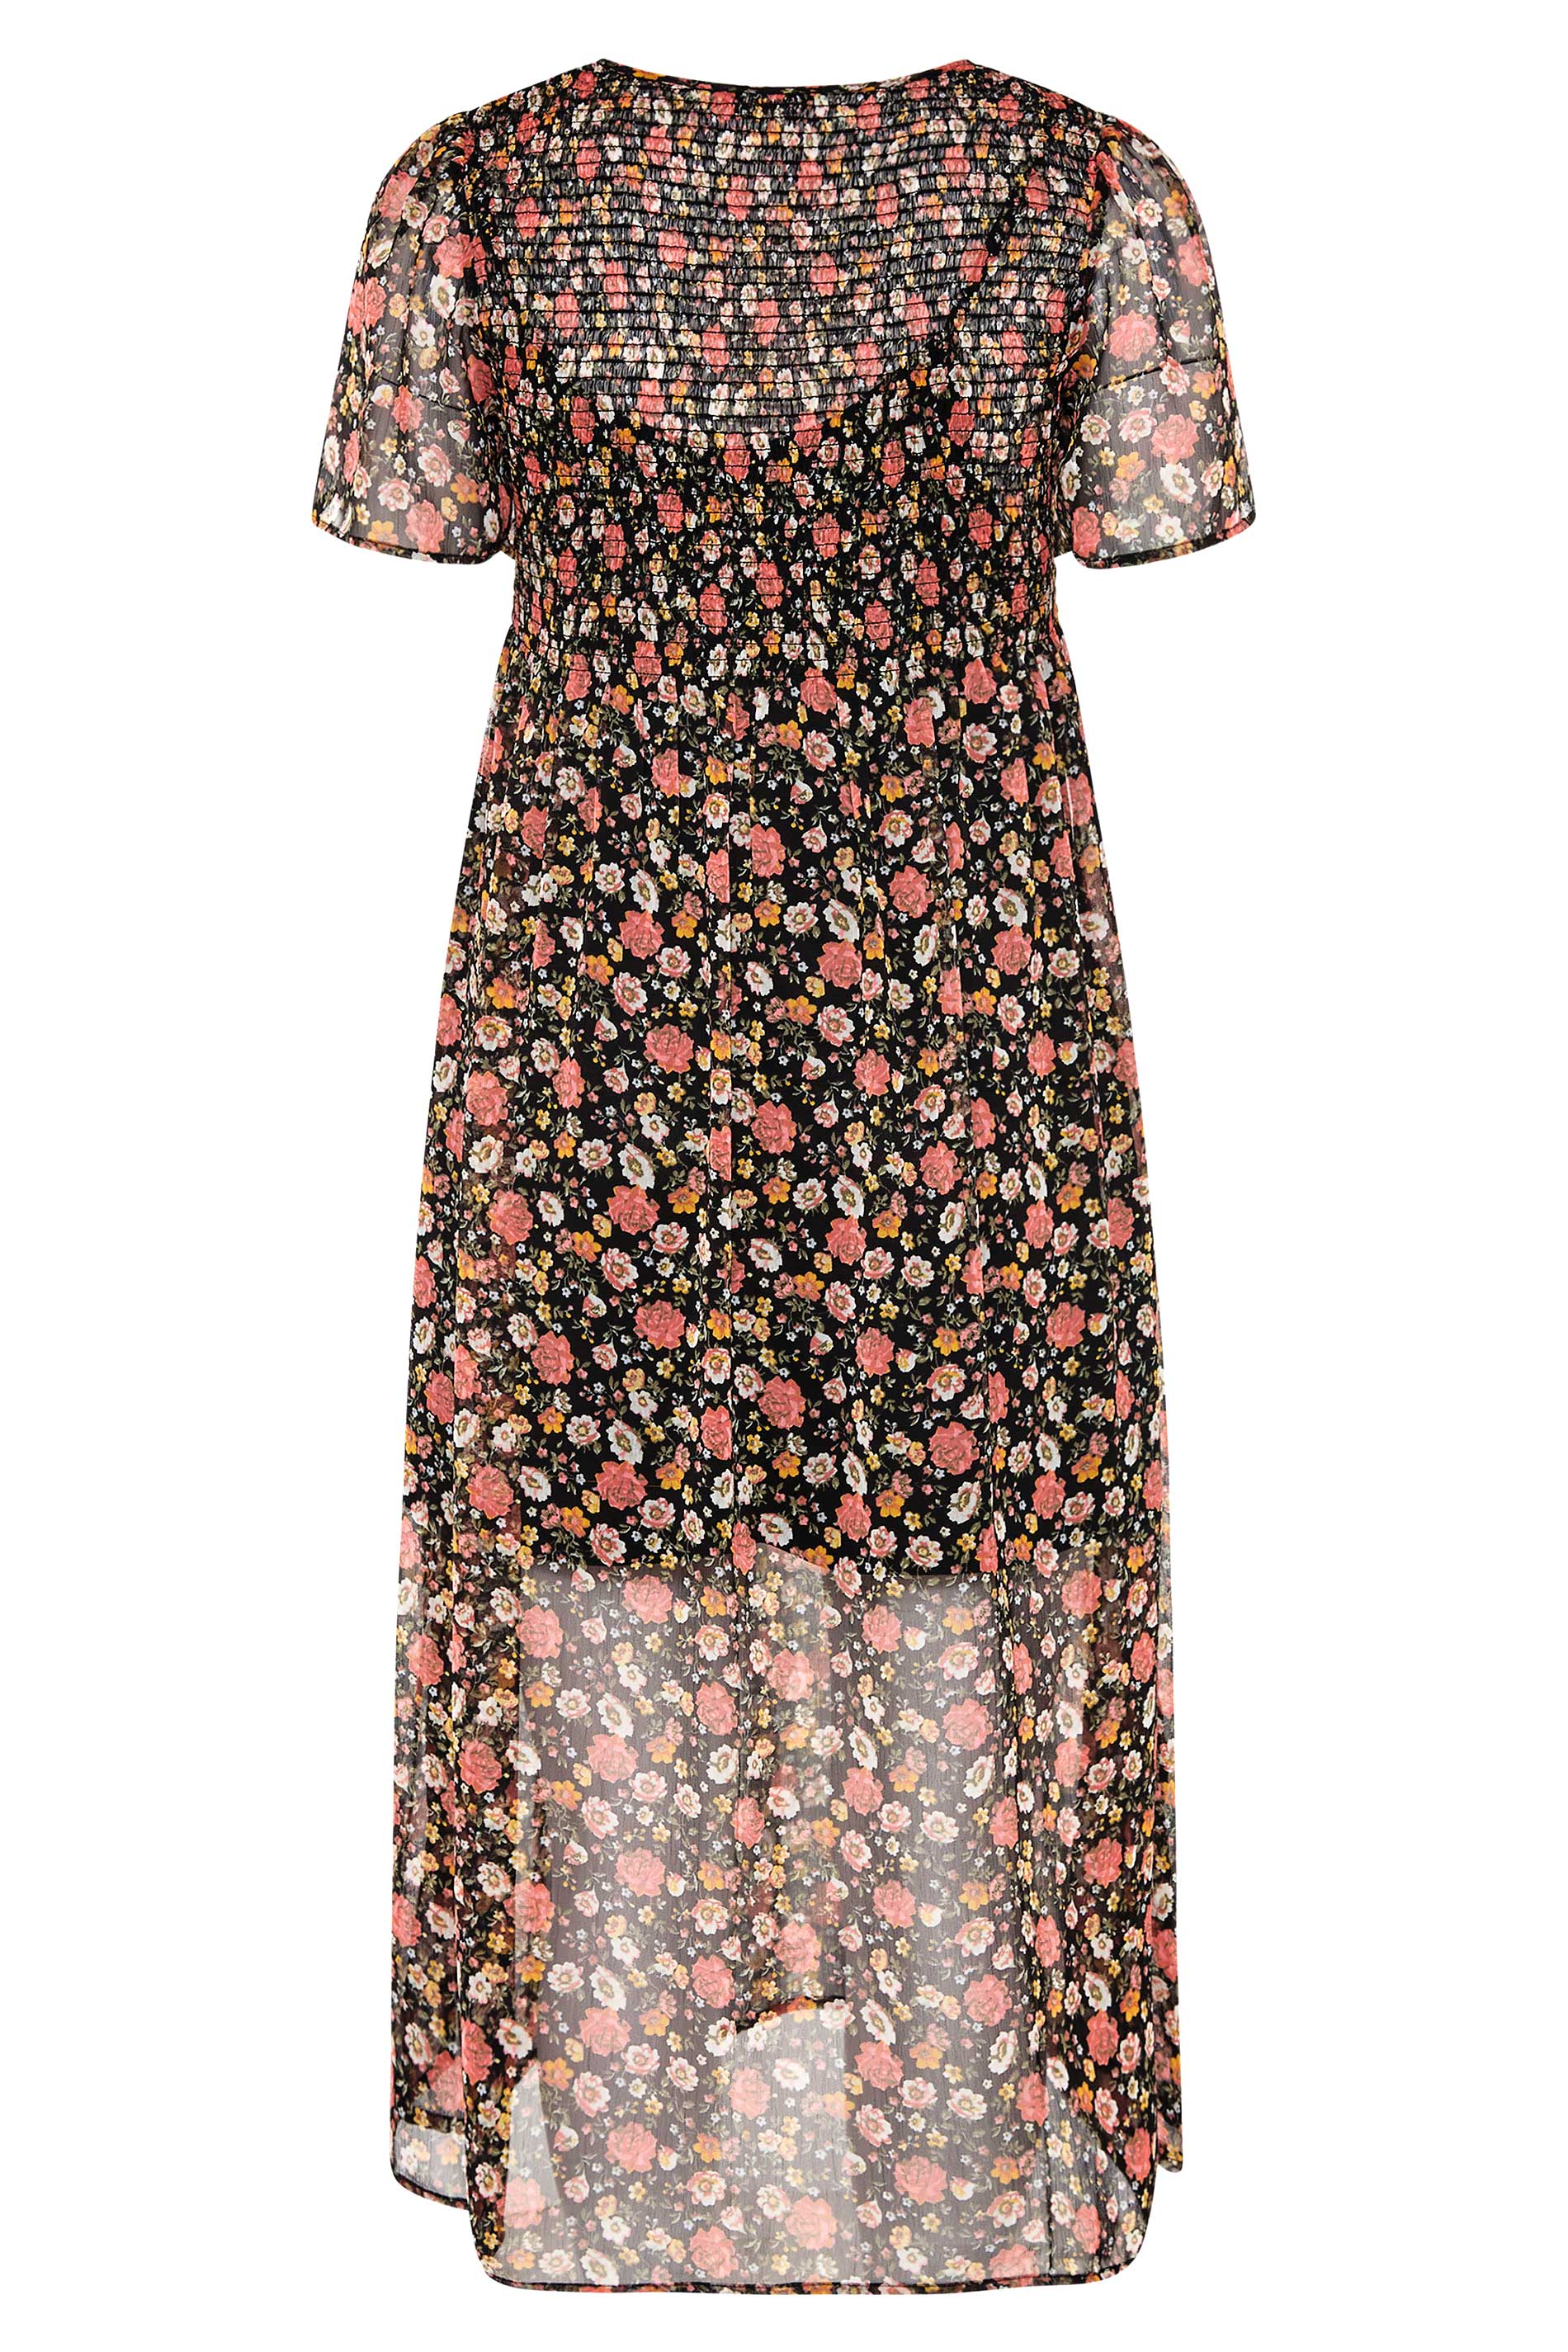 Black Floral Tiered Maxi Dress | Yours Clothing